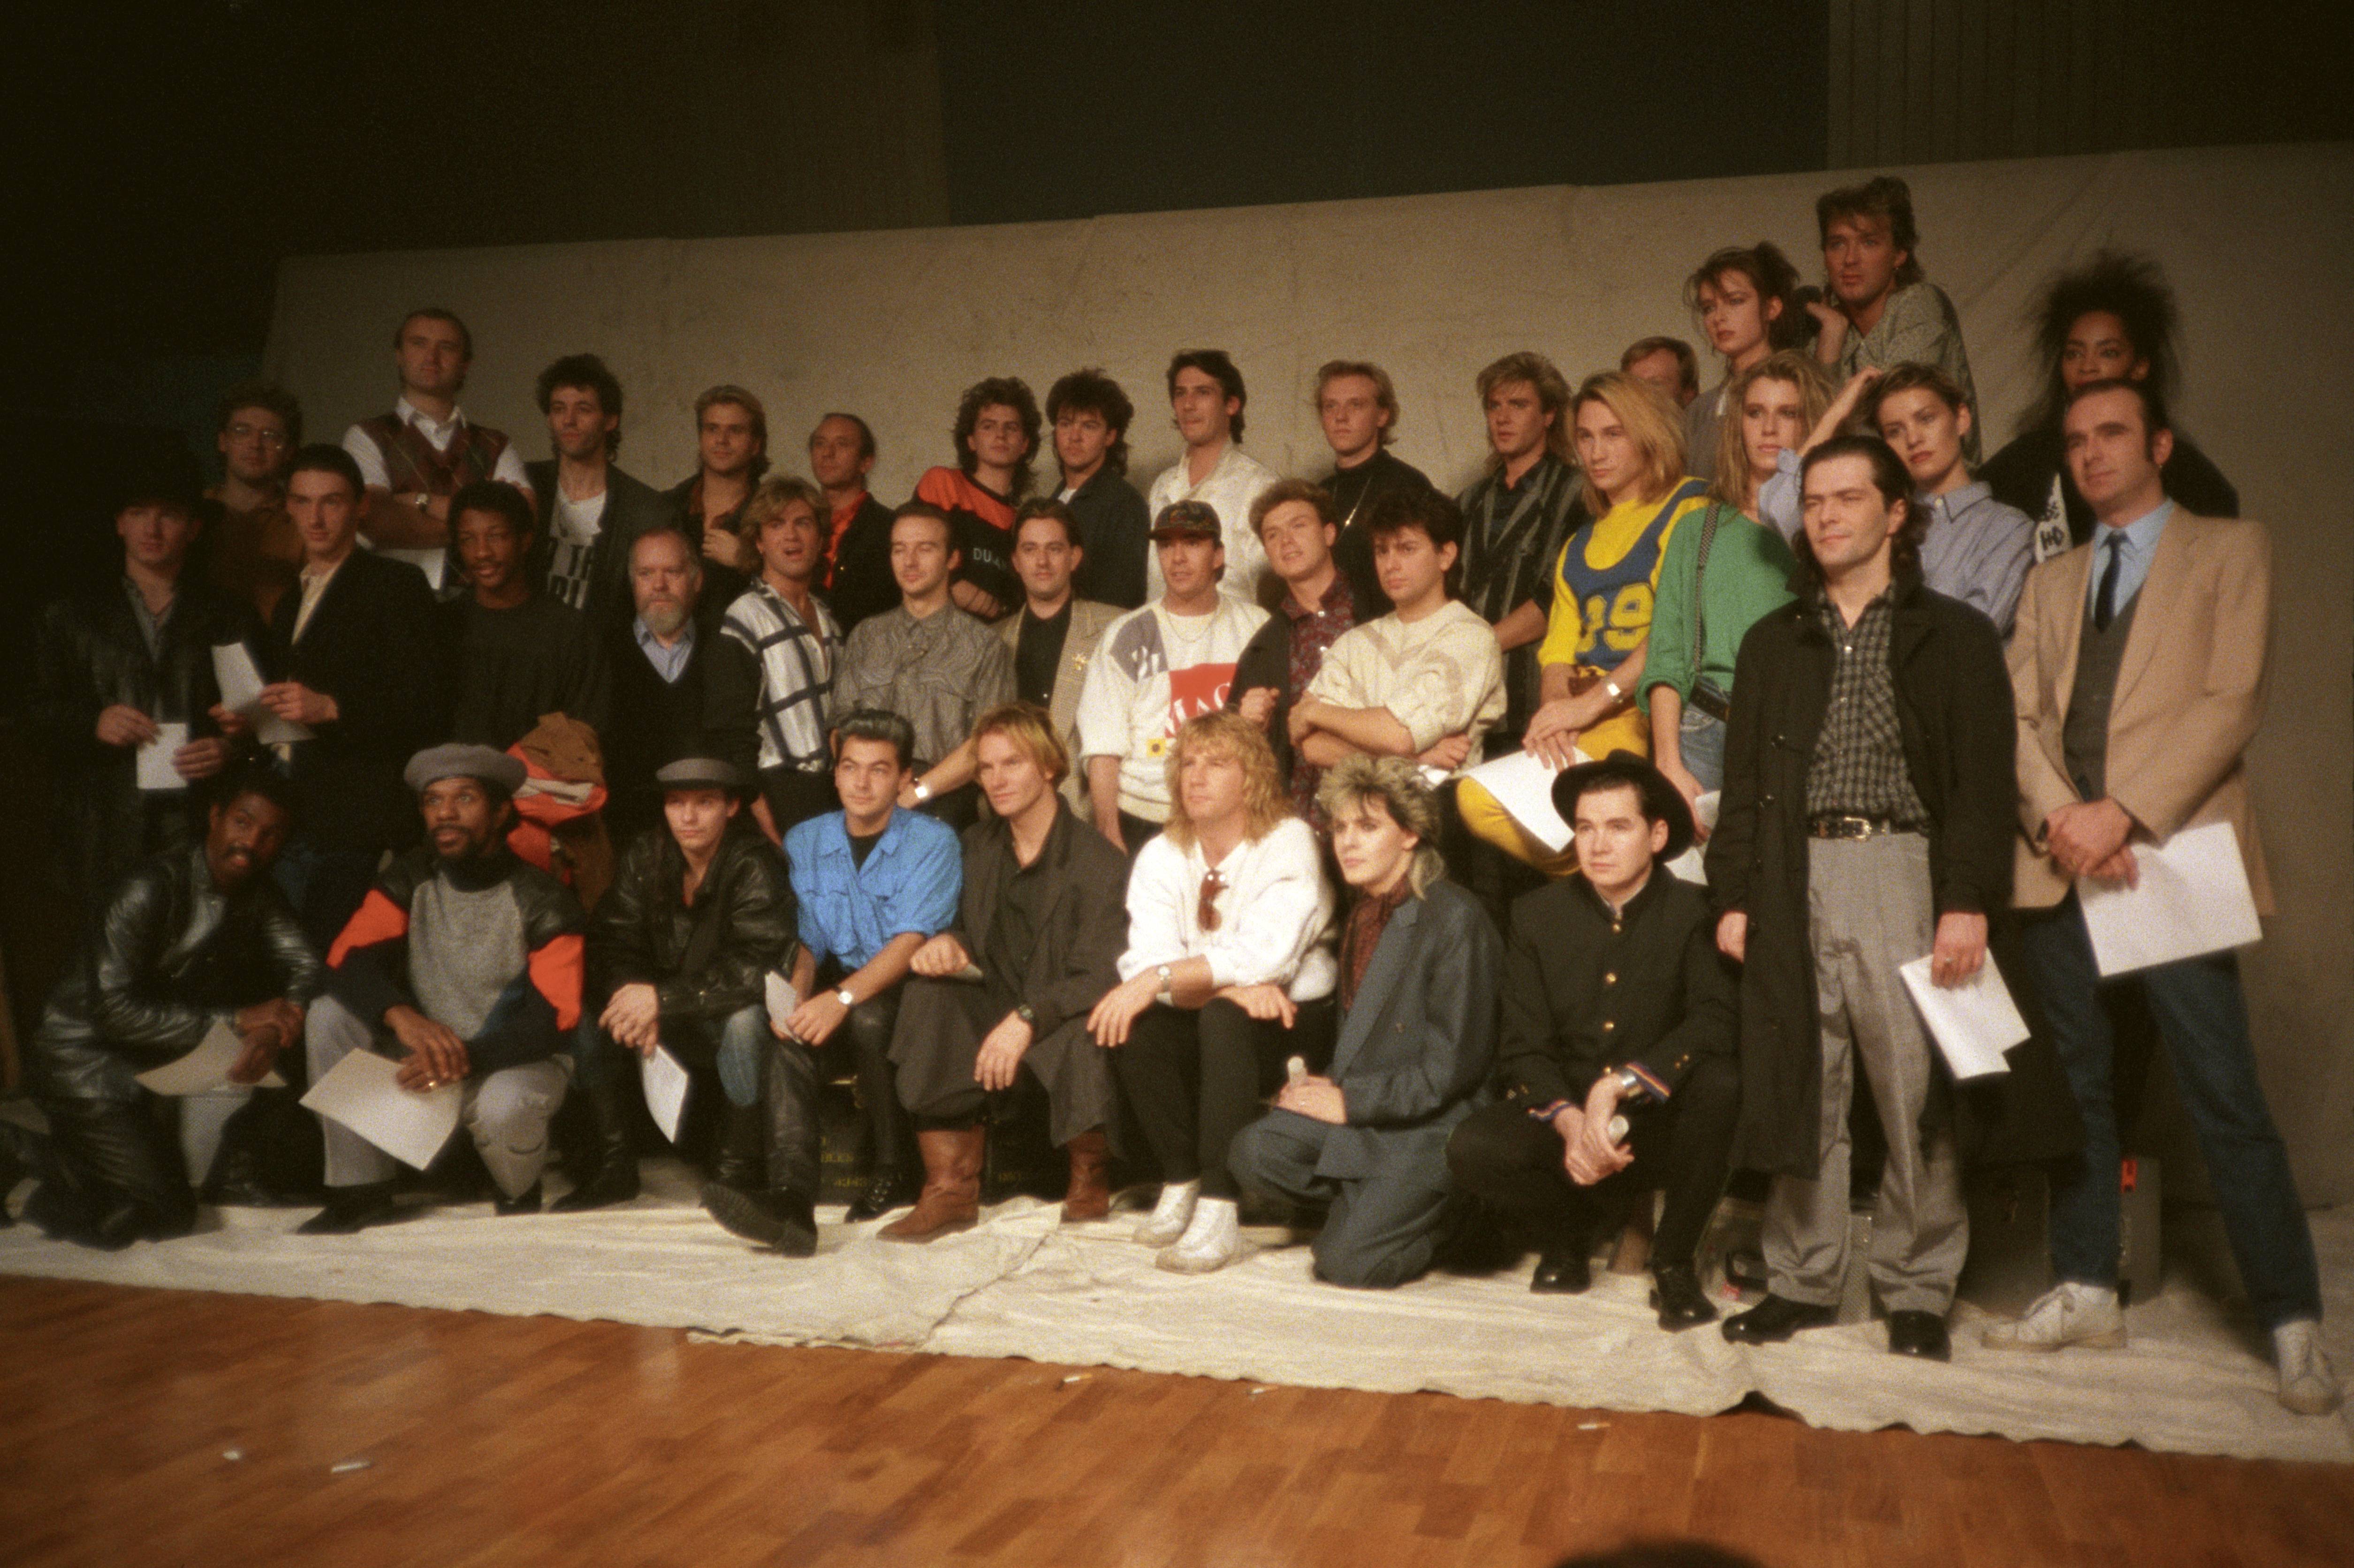 Band Aid posing for a group photo in 1984.